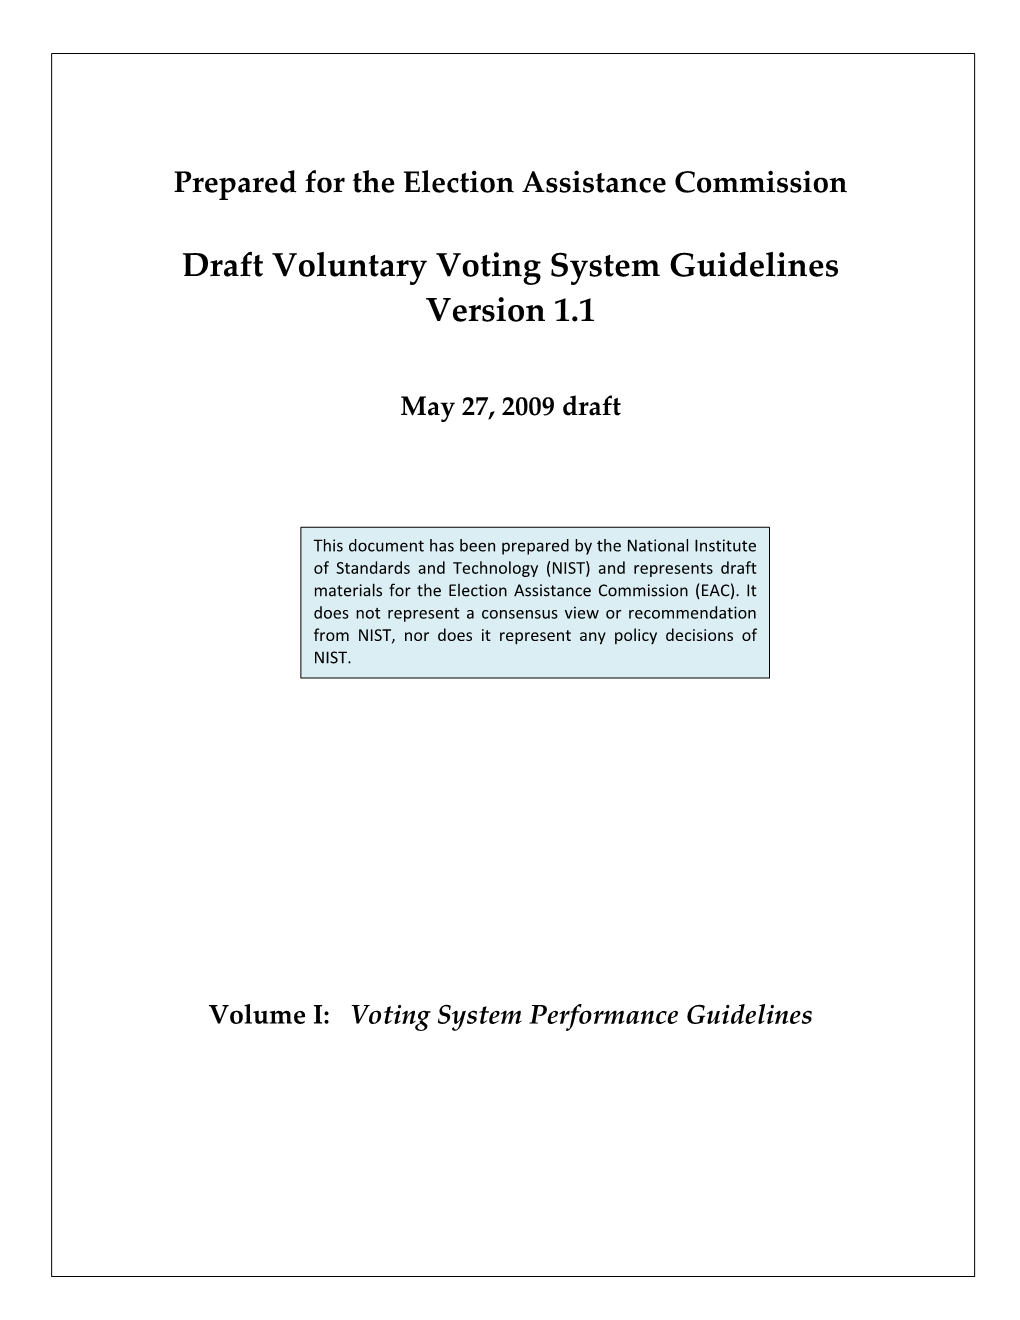 Voluntary Voting System Guidelines Draft Version